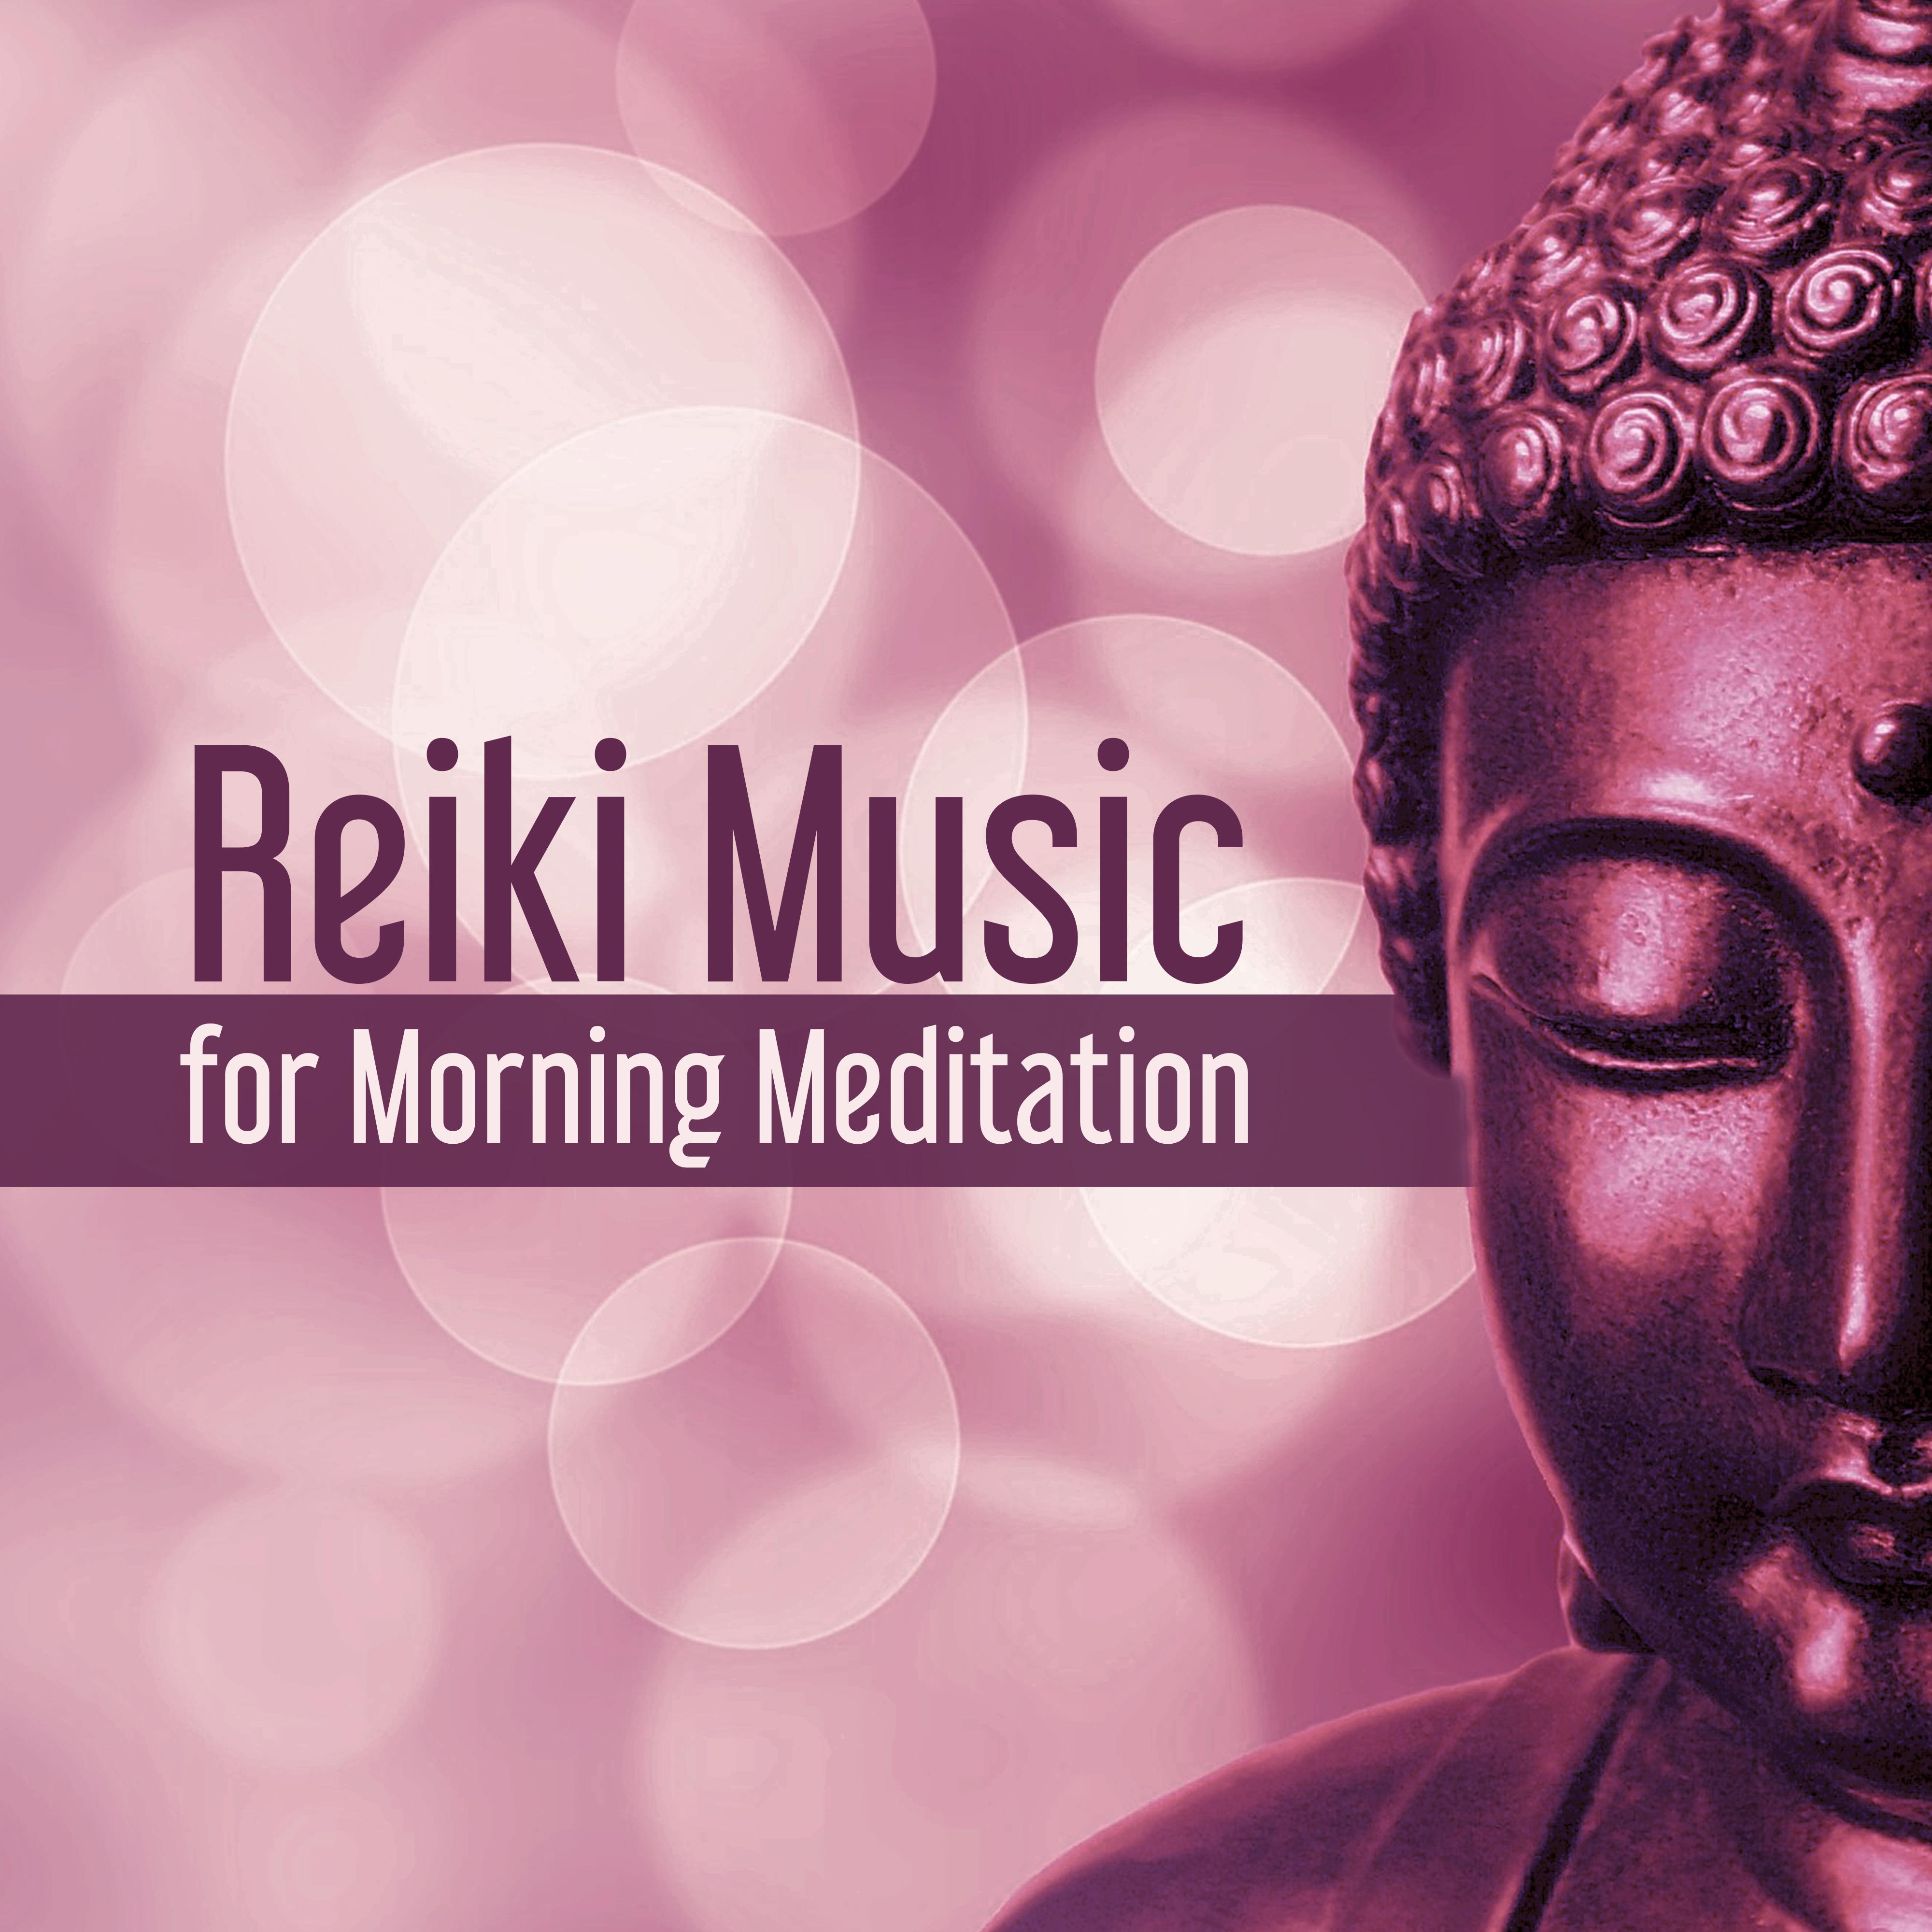 Reiki Music for Morning Meditation  Exercise Your Mind, Calmness  Harmony, Deep Concentration, Asian Zen, Soft Music